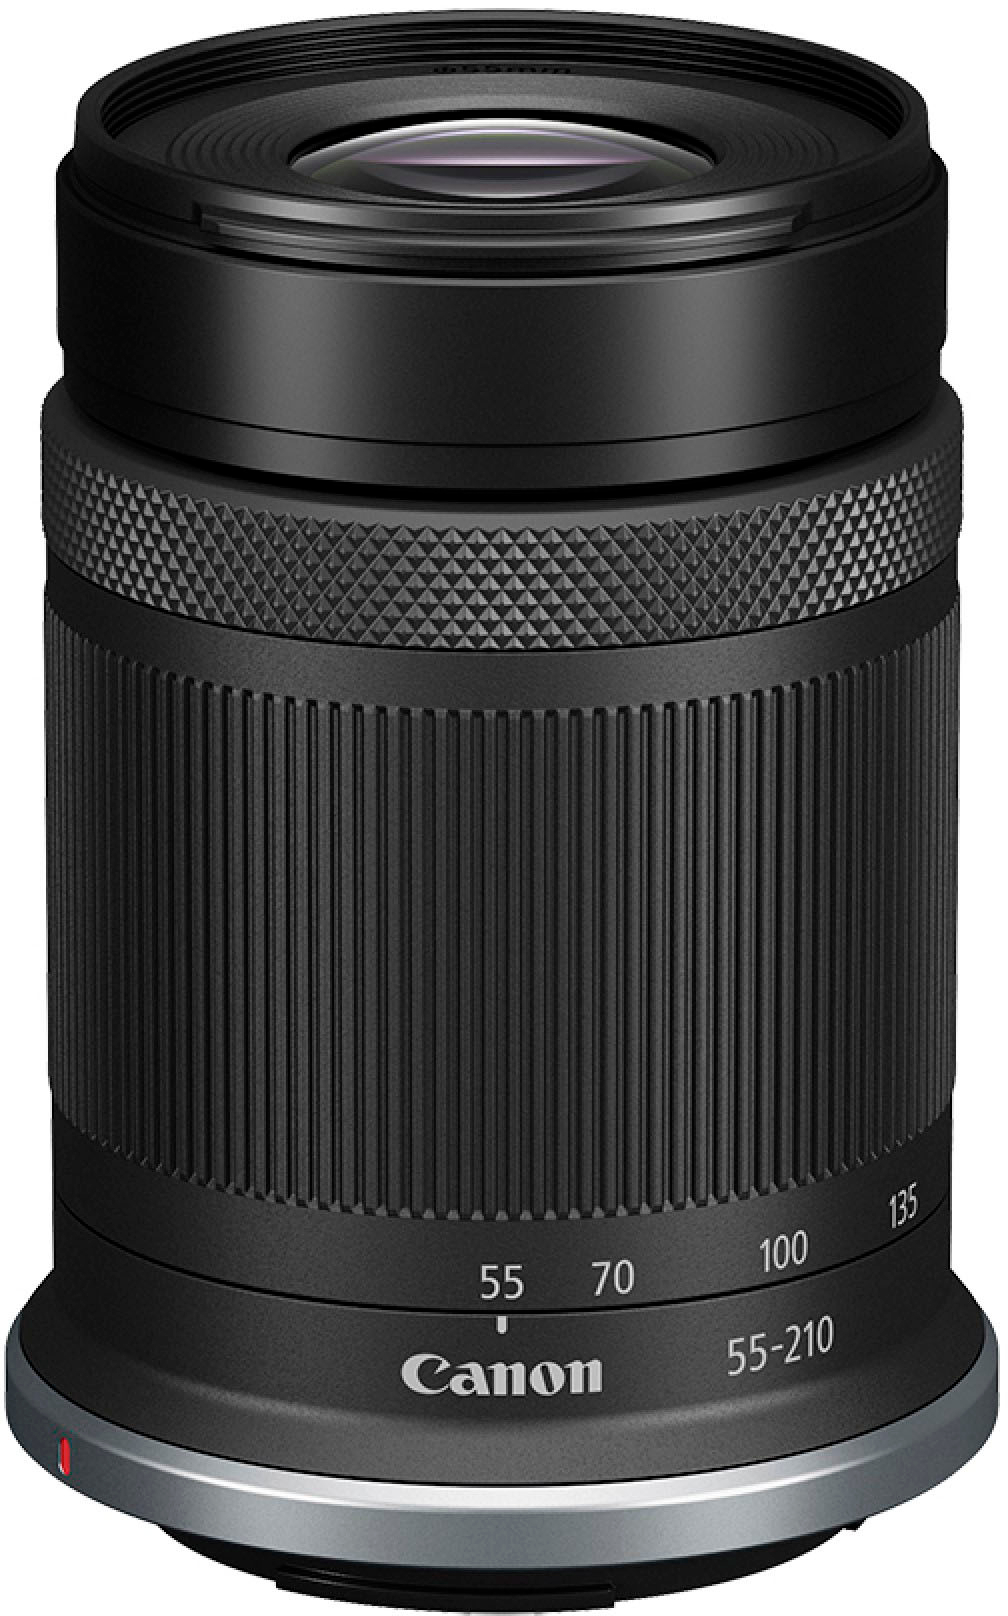 Canon RF-S55-210mm F5-7.1 IS STM Telephoto Zoom Lensfor EOS R